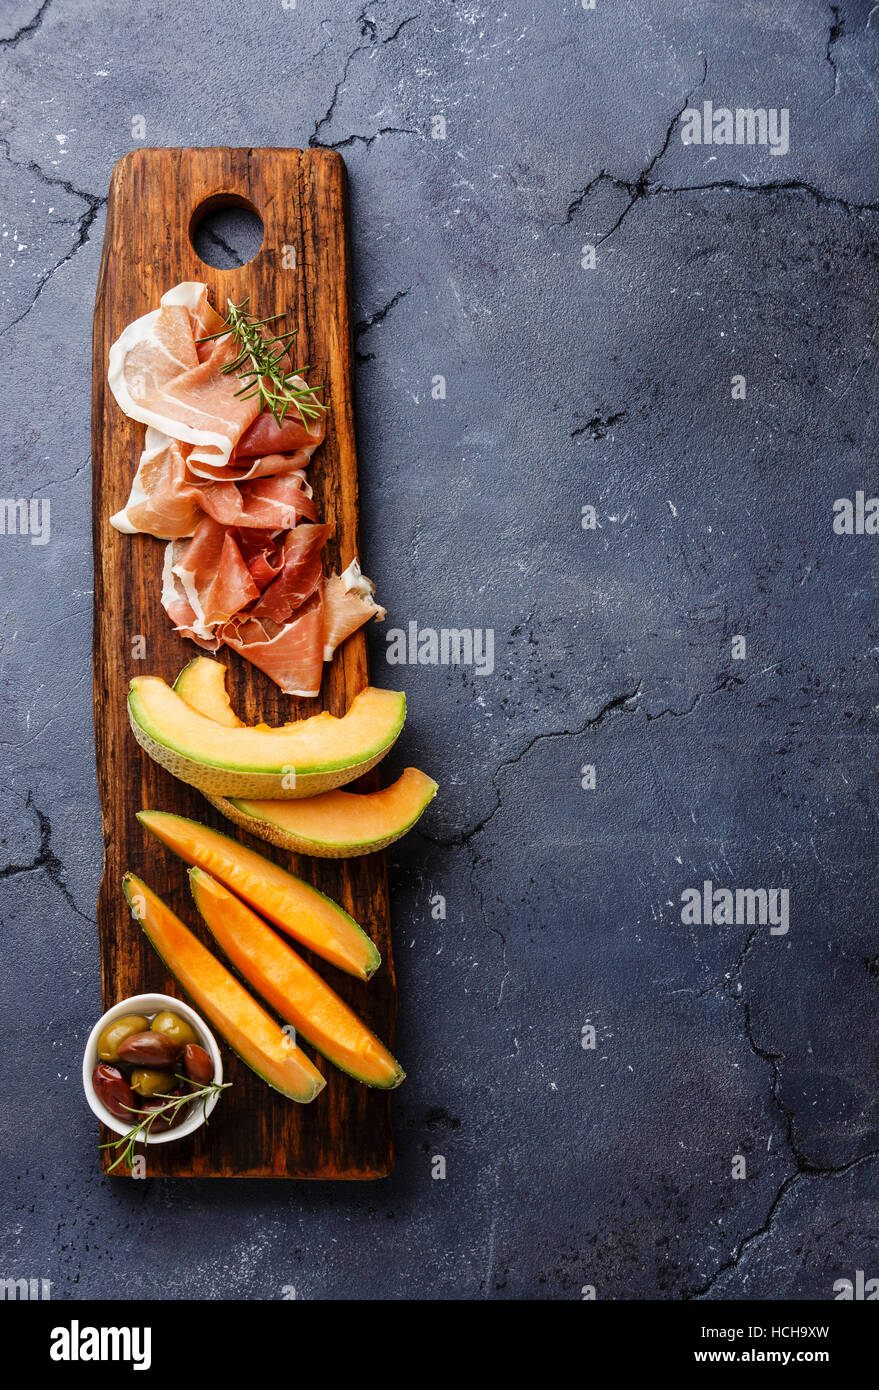 Meat plate antipasti snack with Prosciutto ham, cantaloupe melon and olives on dark stone background copy space Stock Photo